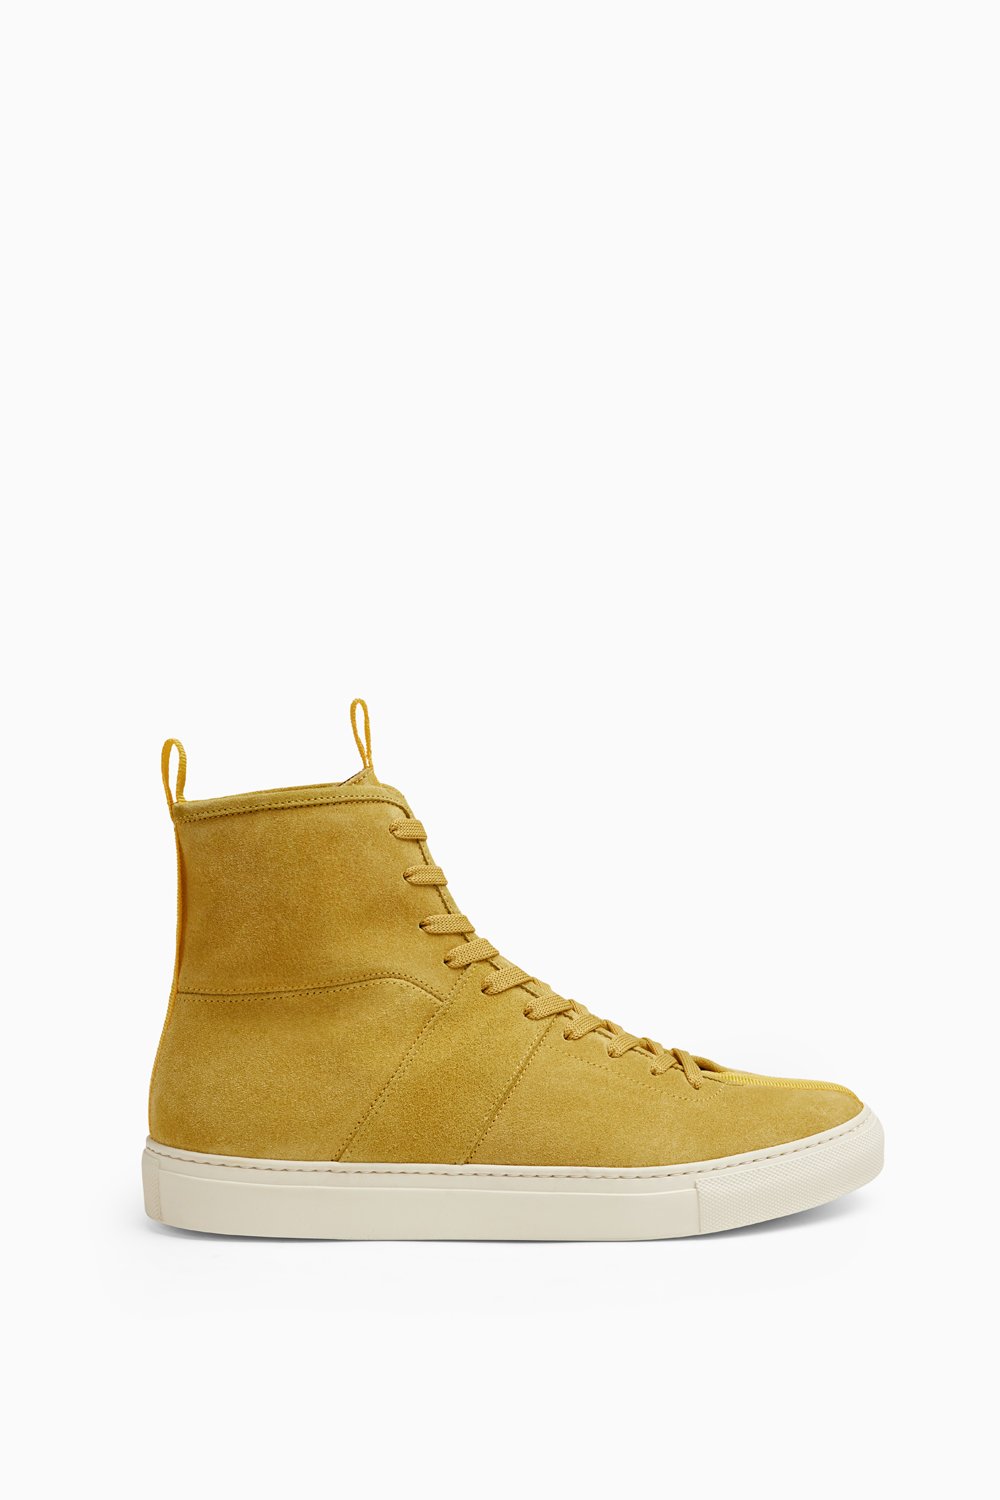 Yellow Is The Color of Sunrays: Daniel Patrick Roamer High Top Sneaker ...